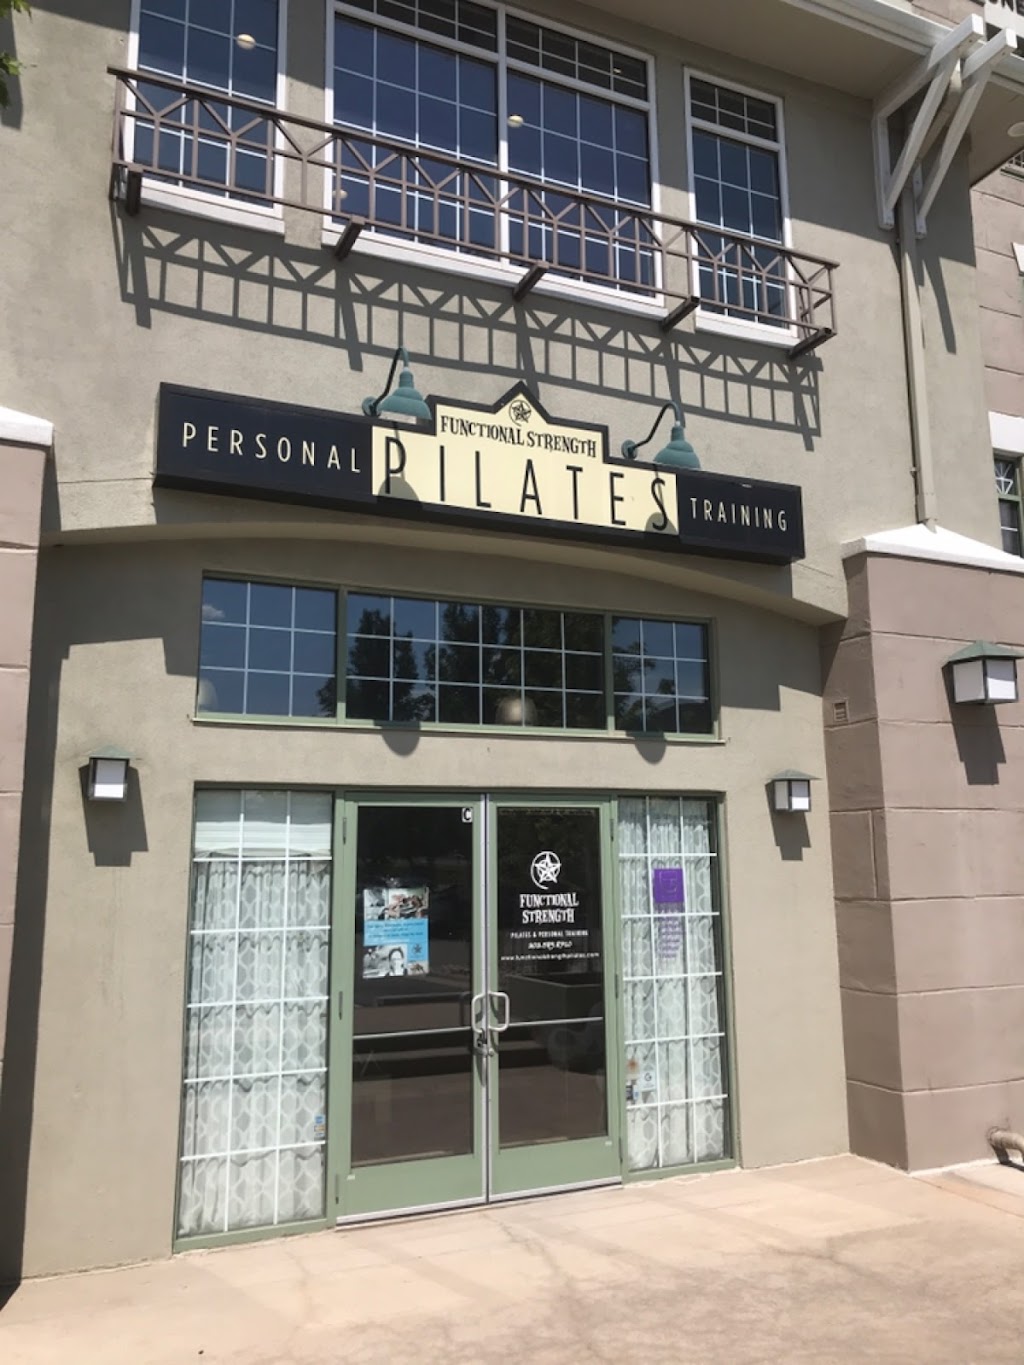 Functional Strength Pilates | 10047 Park Meadows Dr, Lone Tree, CO 80124 | Phone: (303) 589-8710